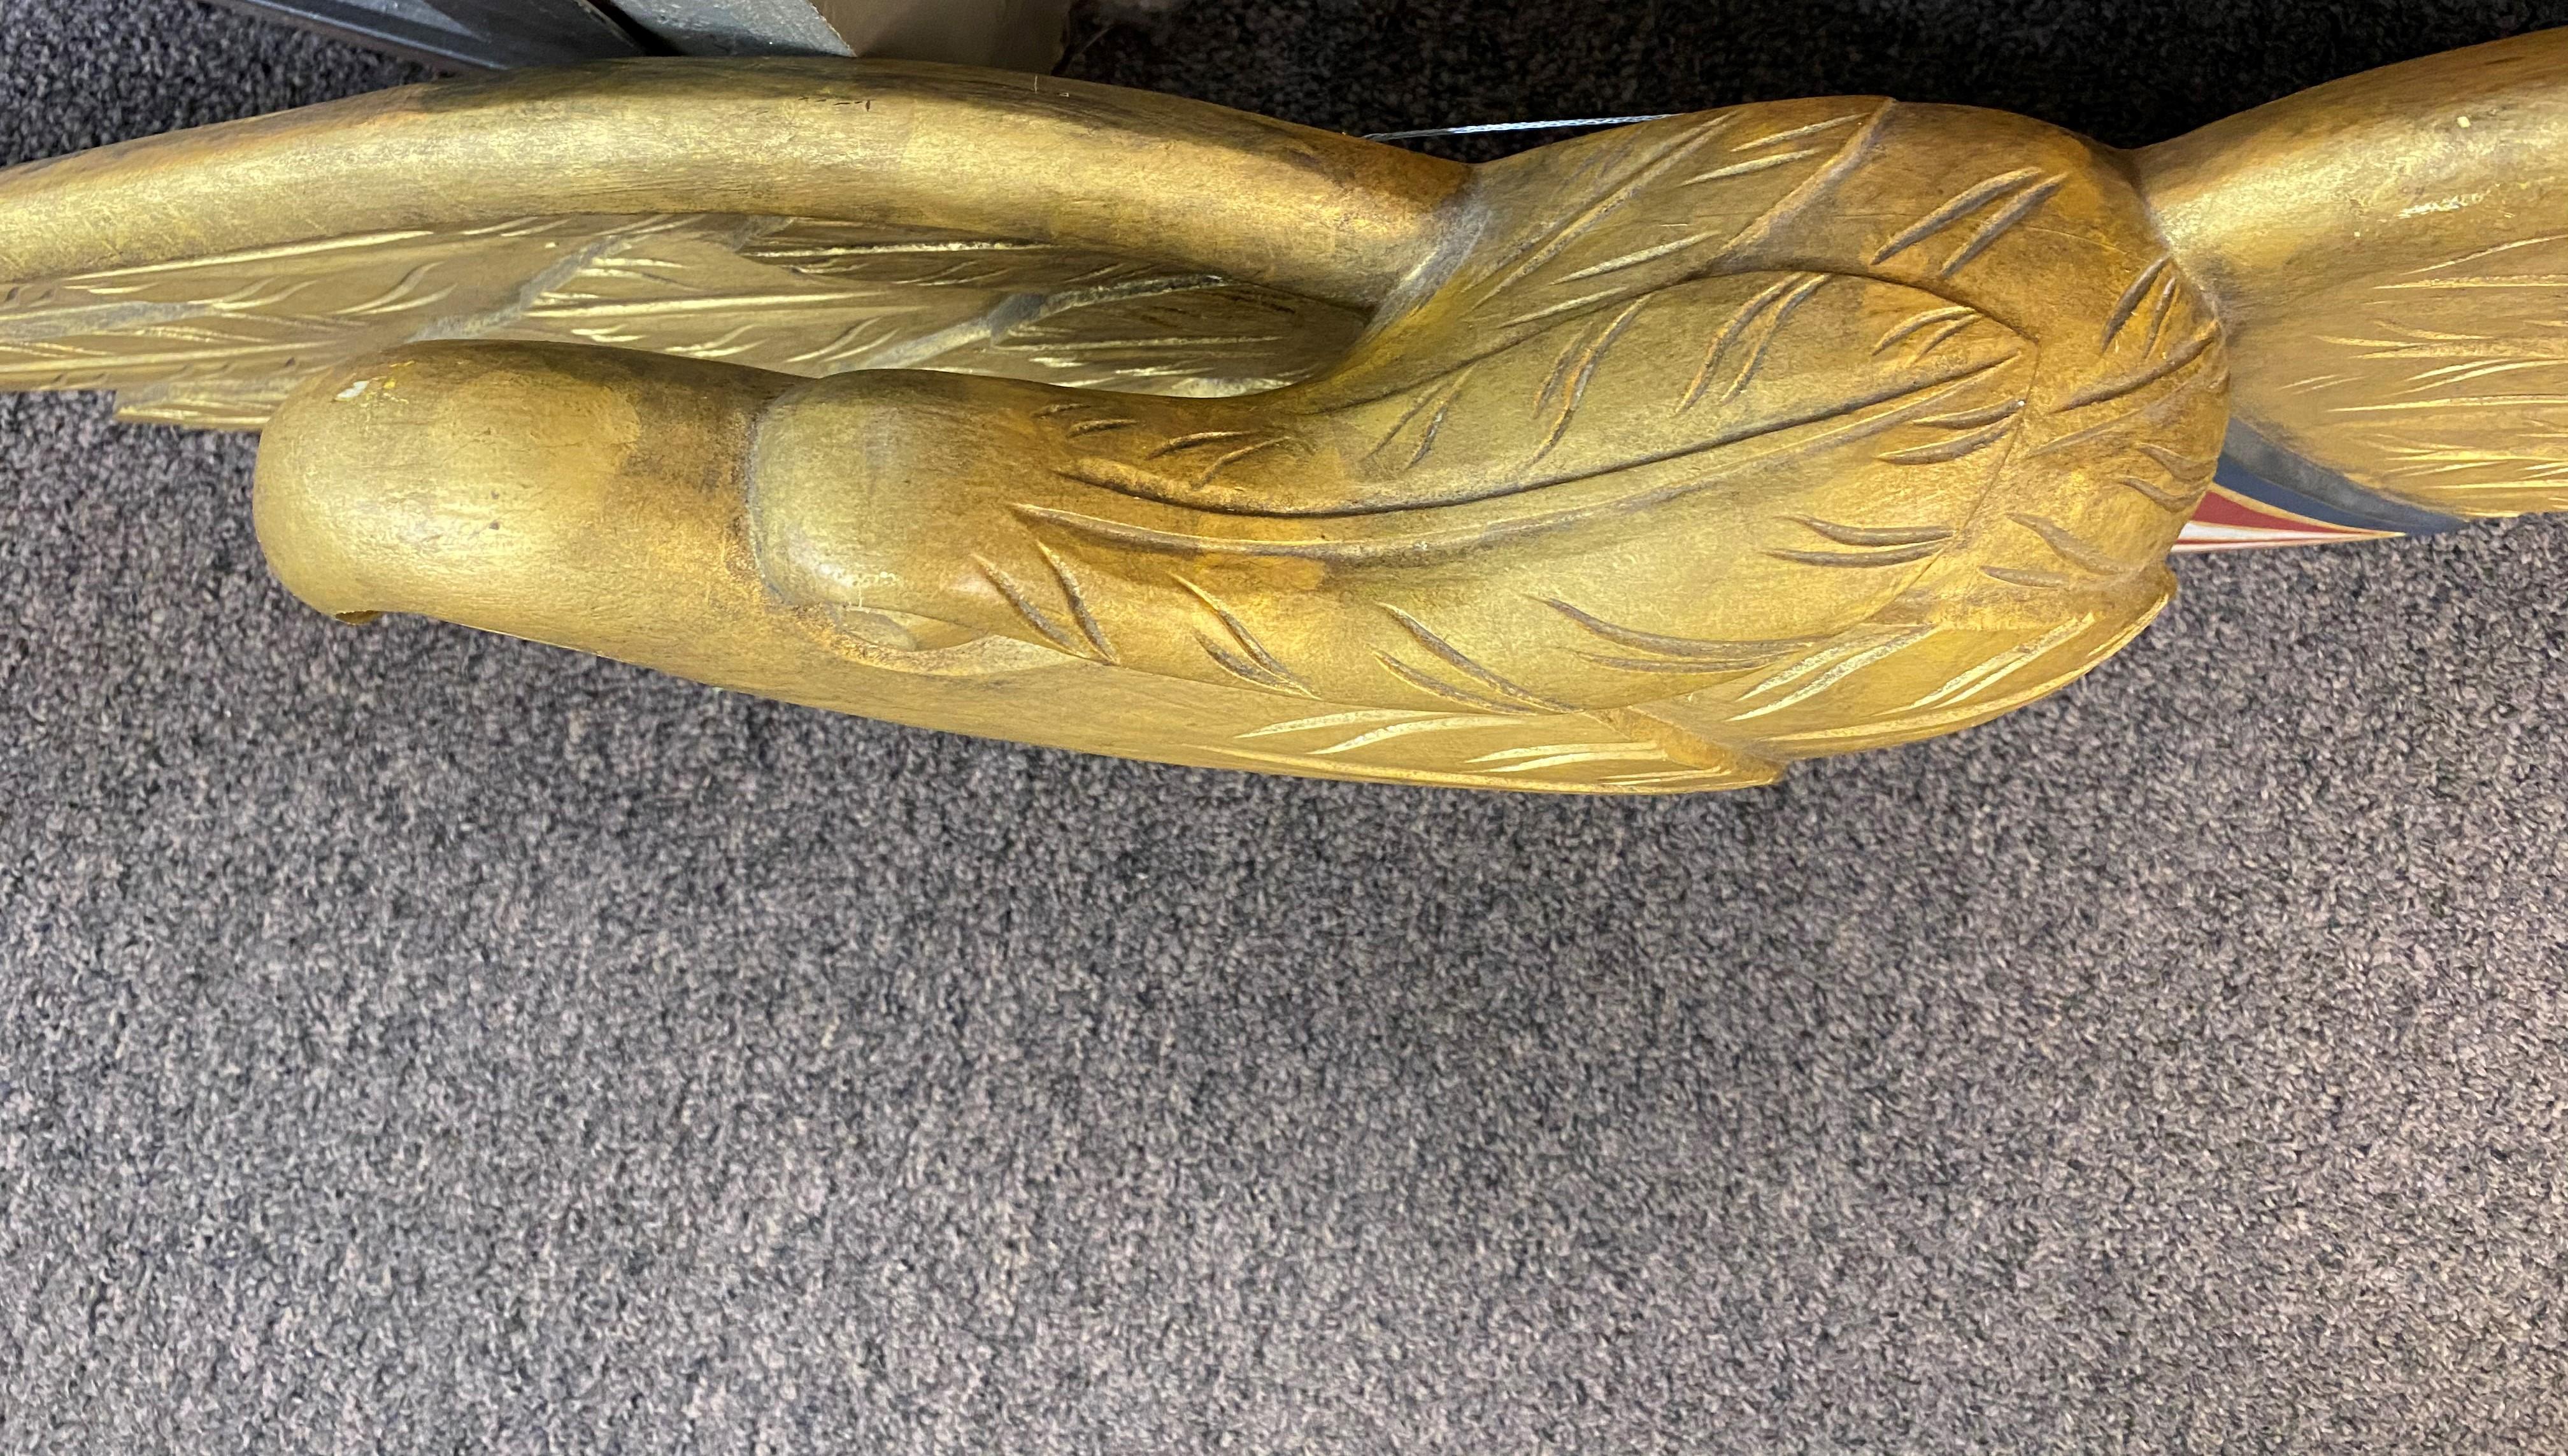 Hand-Carved Carved & Gilt Wooden Bellamy Style Eagle Wall Plaque by Paul White, Cape Cod MA